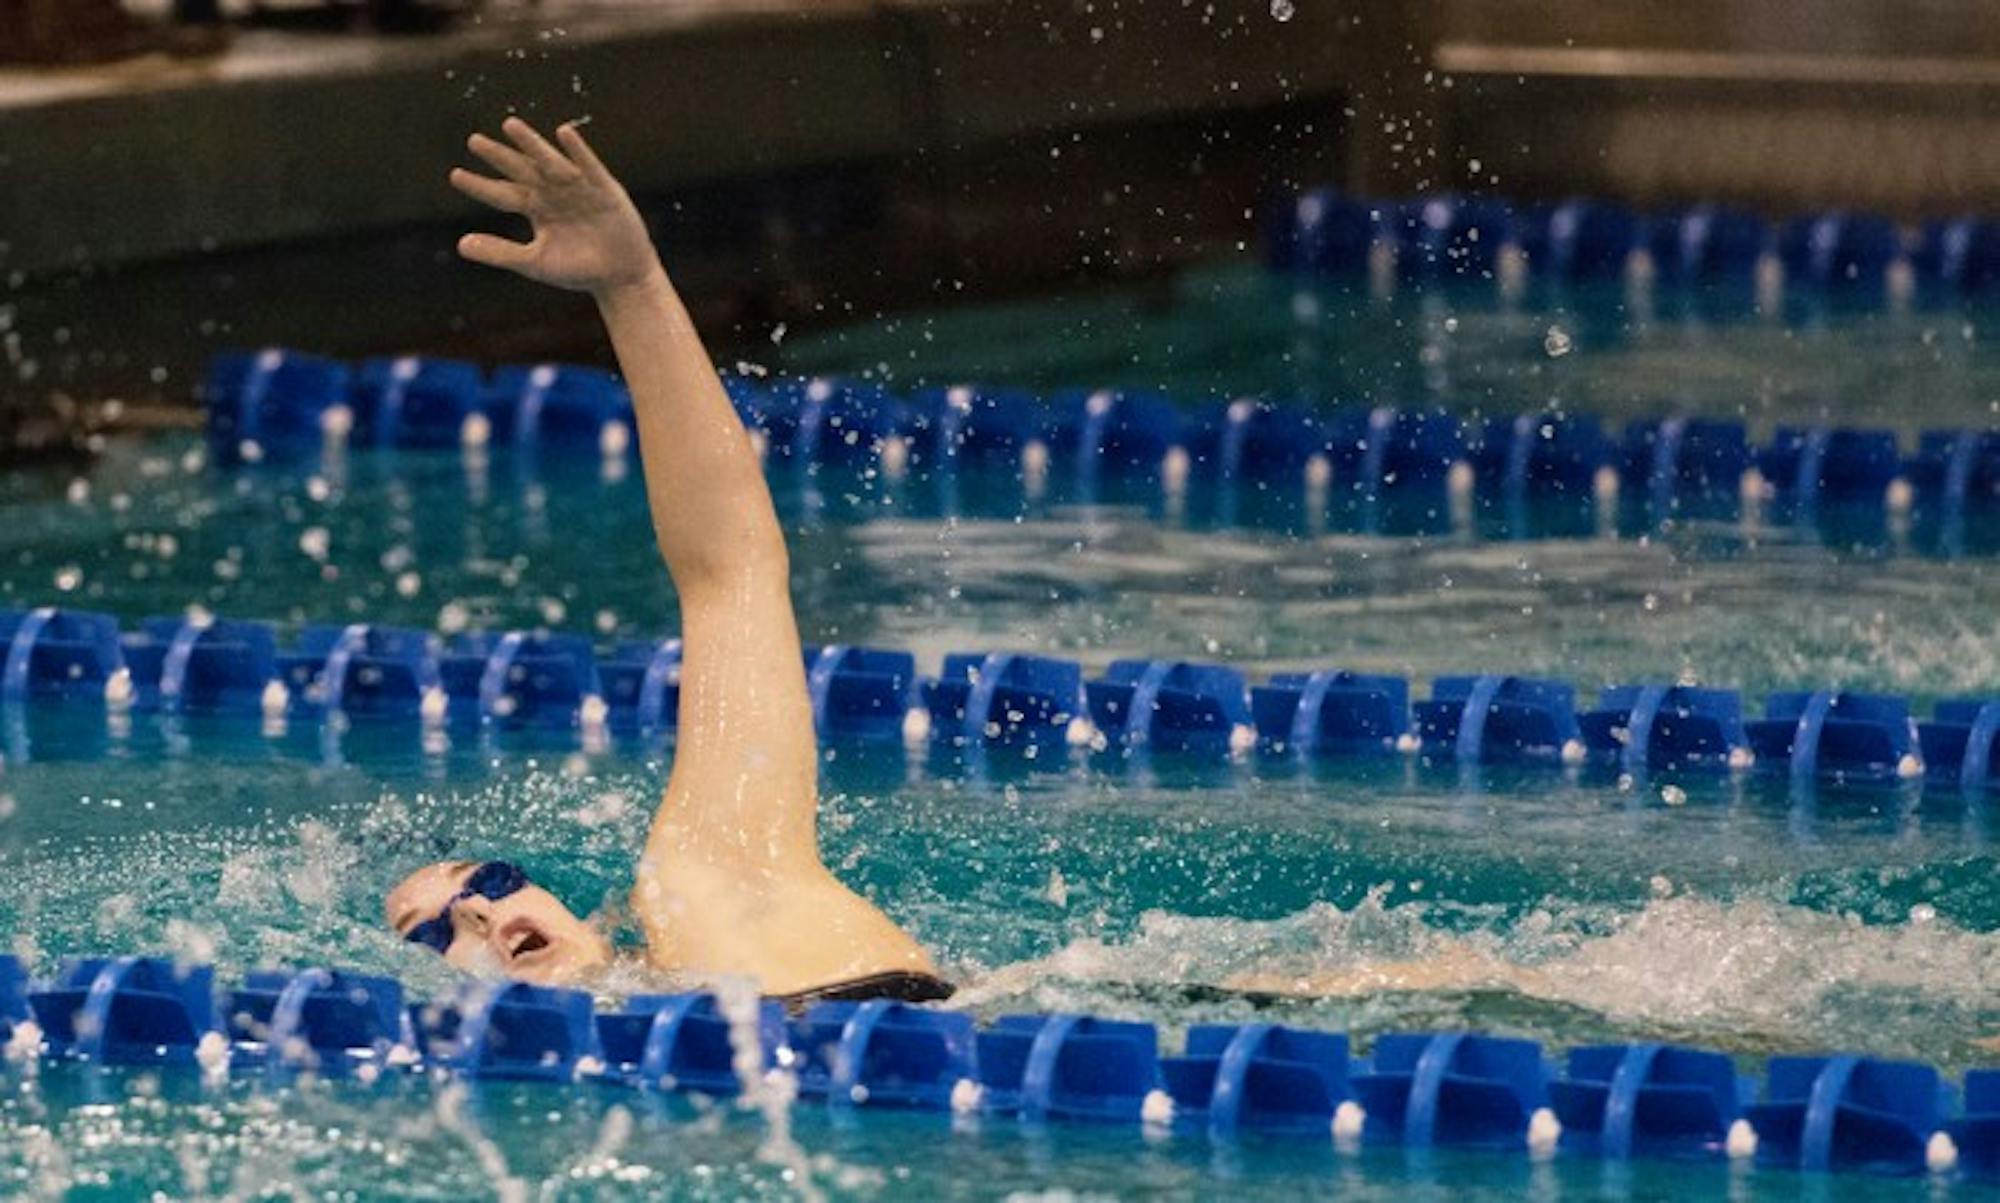 Senior Courtney Whyte comes up for air during a meet against Purdue on Nov. 1 at Rolf’s Aquatic Center. Whyte finished second in the 200-yard backstroke during the meet.